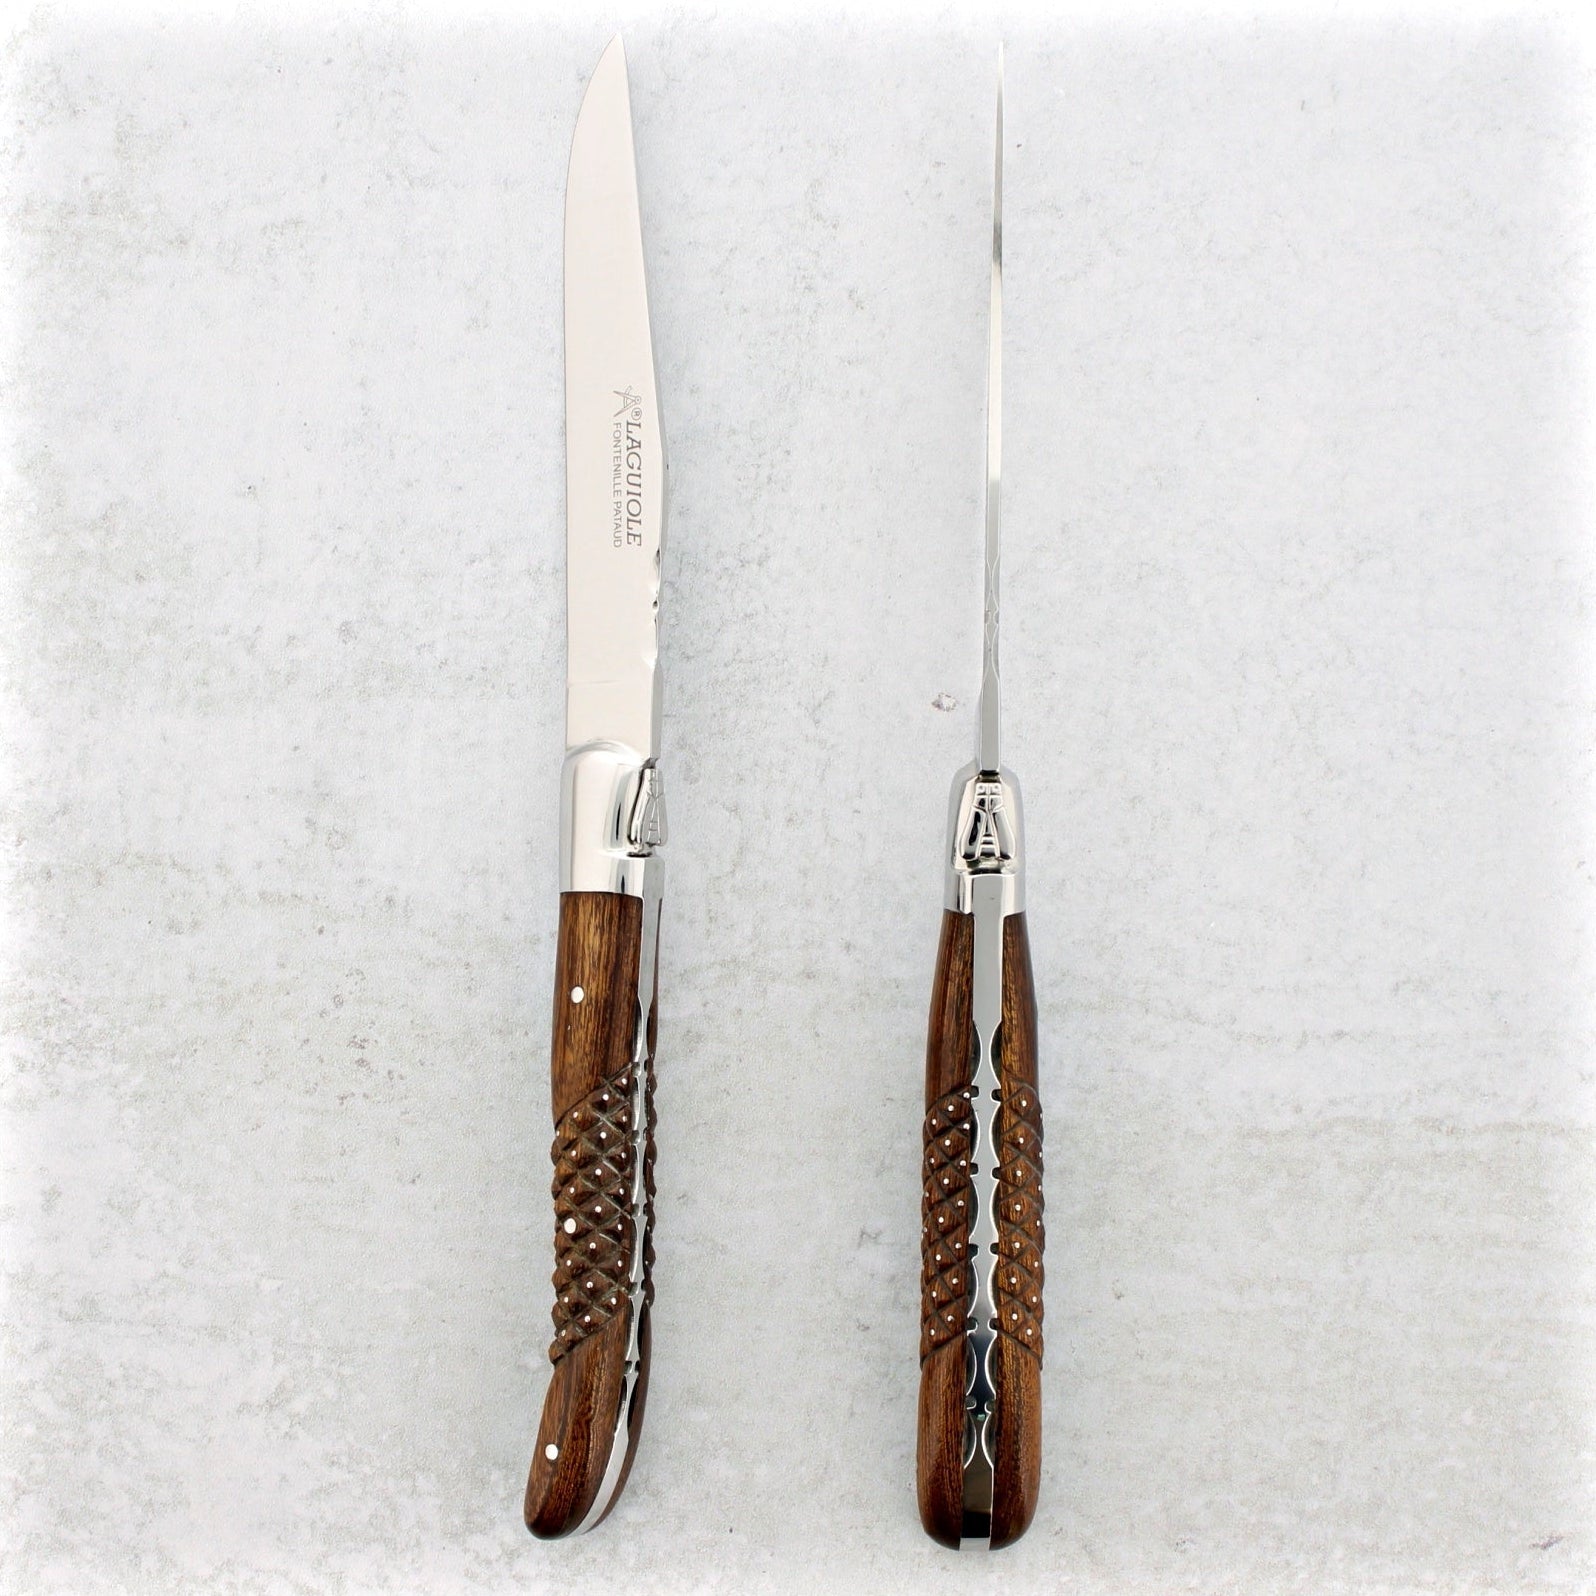 https://www.laguiole-imports.com/cdn/shop/products/Laguiole-Forged-Steak-Knives-Studded-Desert-Ironwood-Set-of-2-Fontenille-Pataud.jpg?v=1666213647